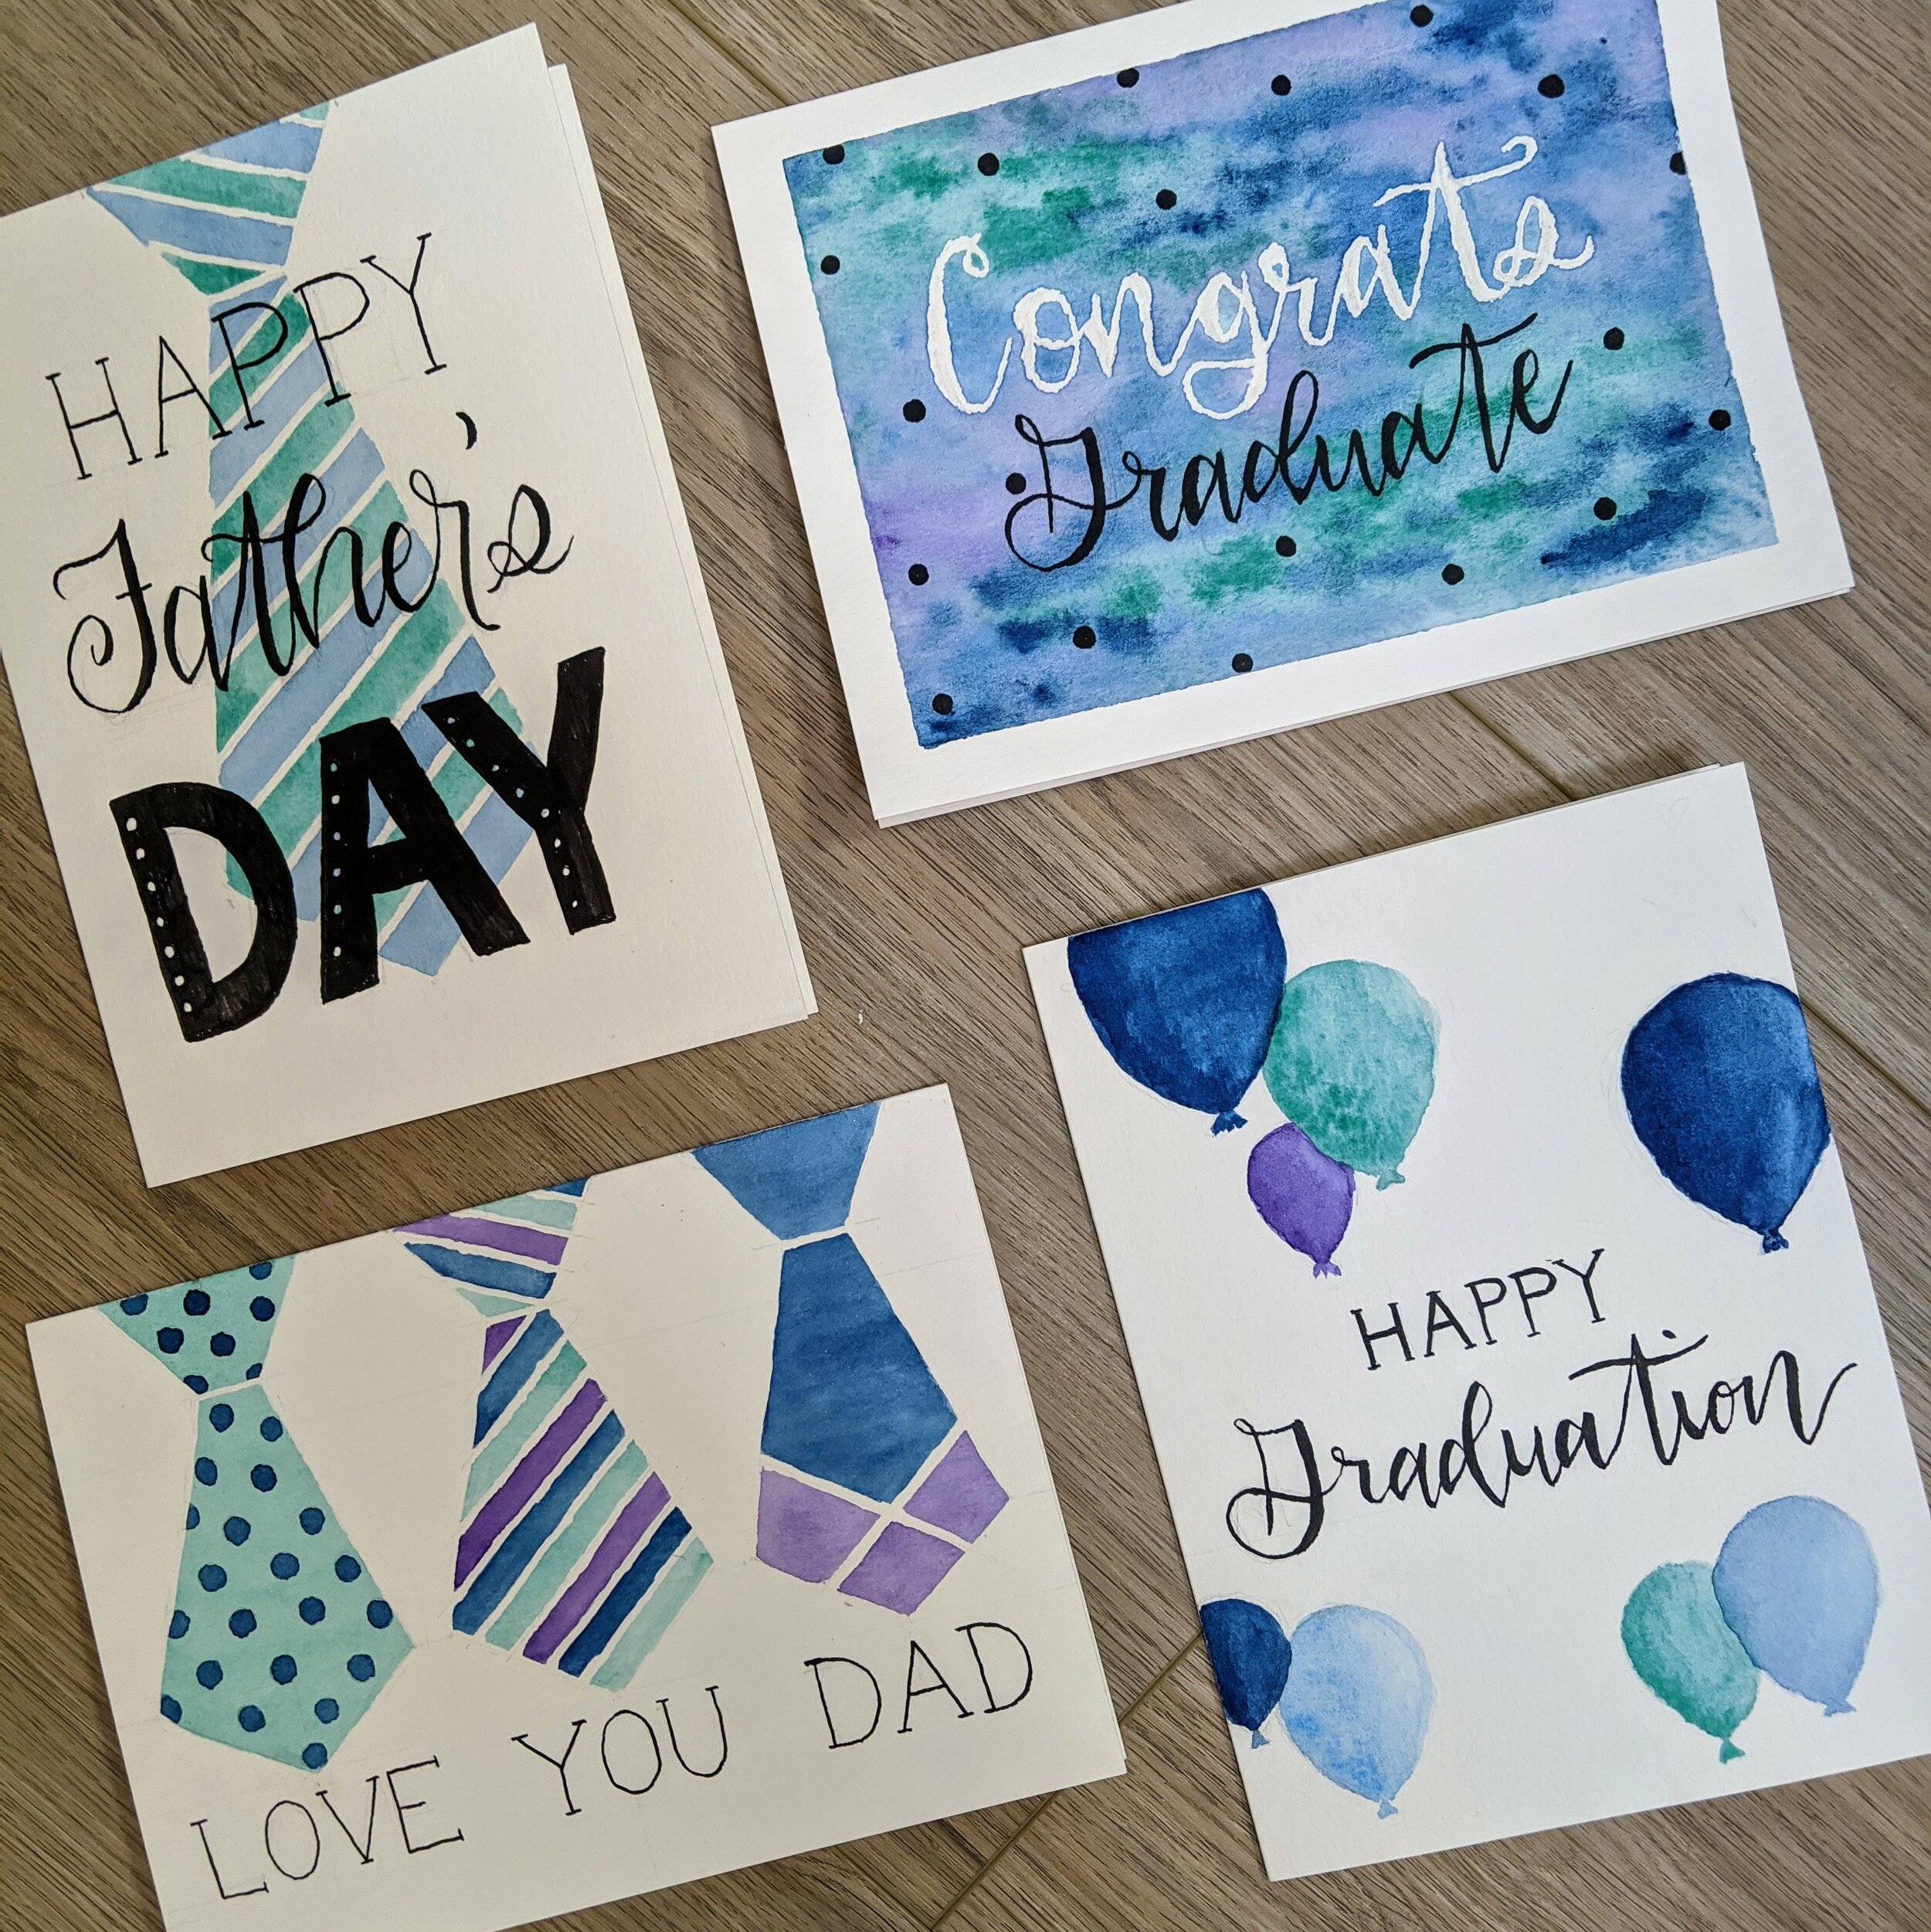 Simple Watercolor Patterns with Masking Tape